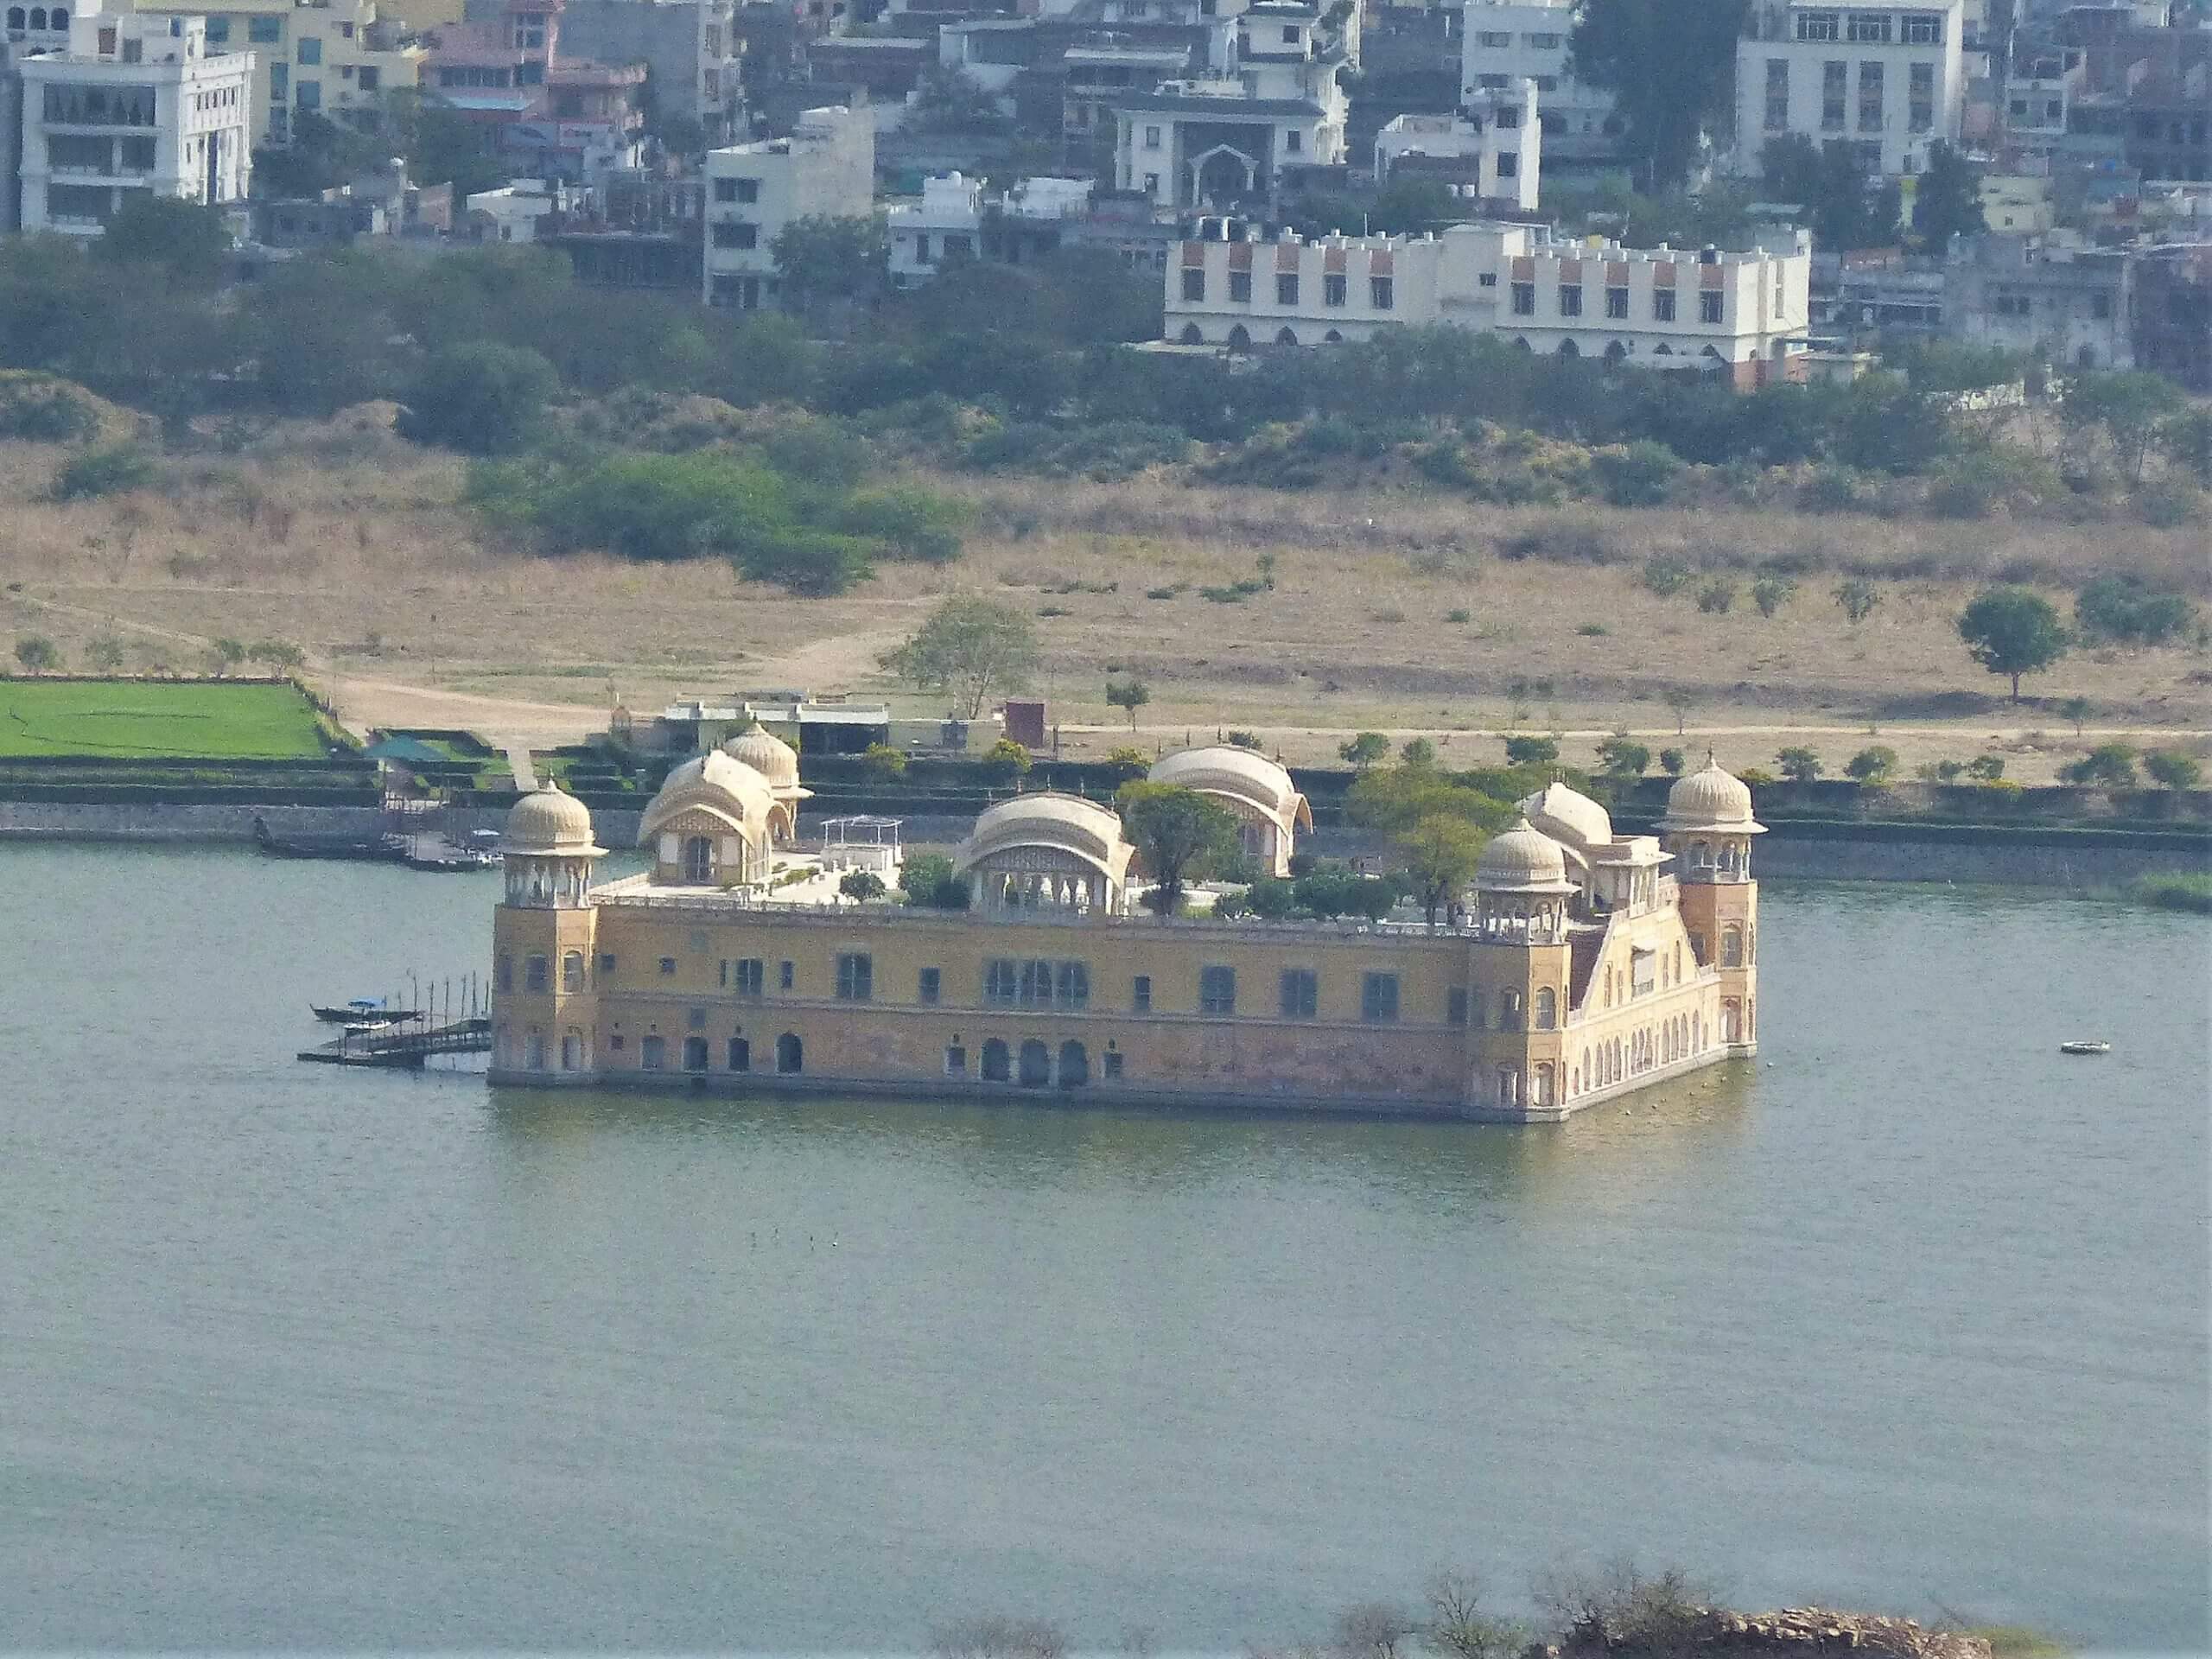 Jal Mahal from above